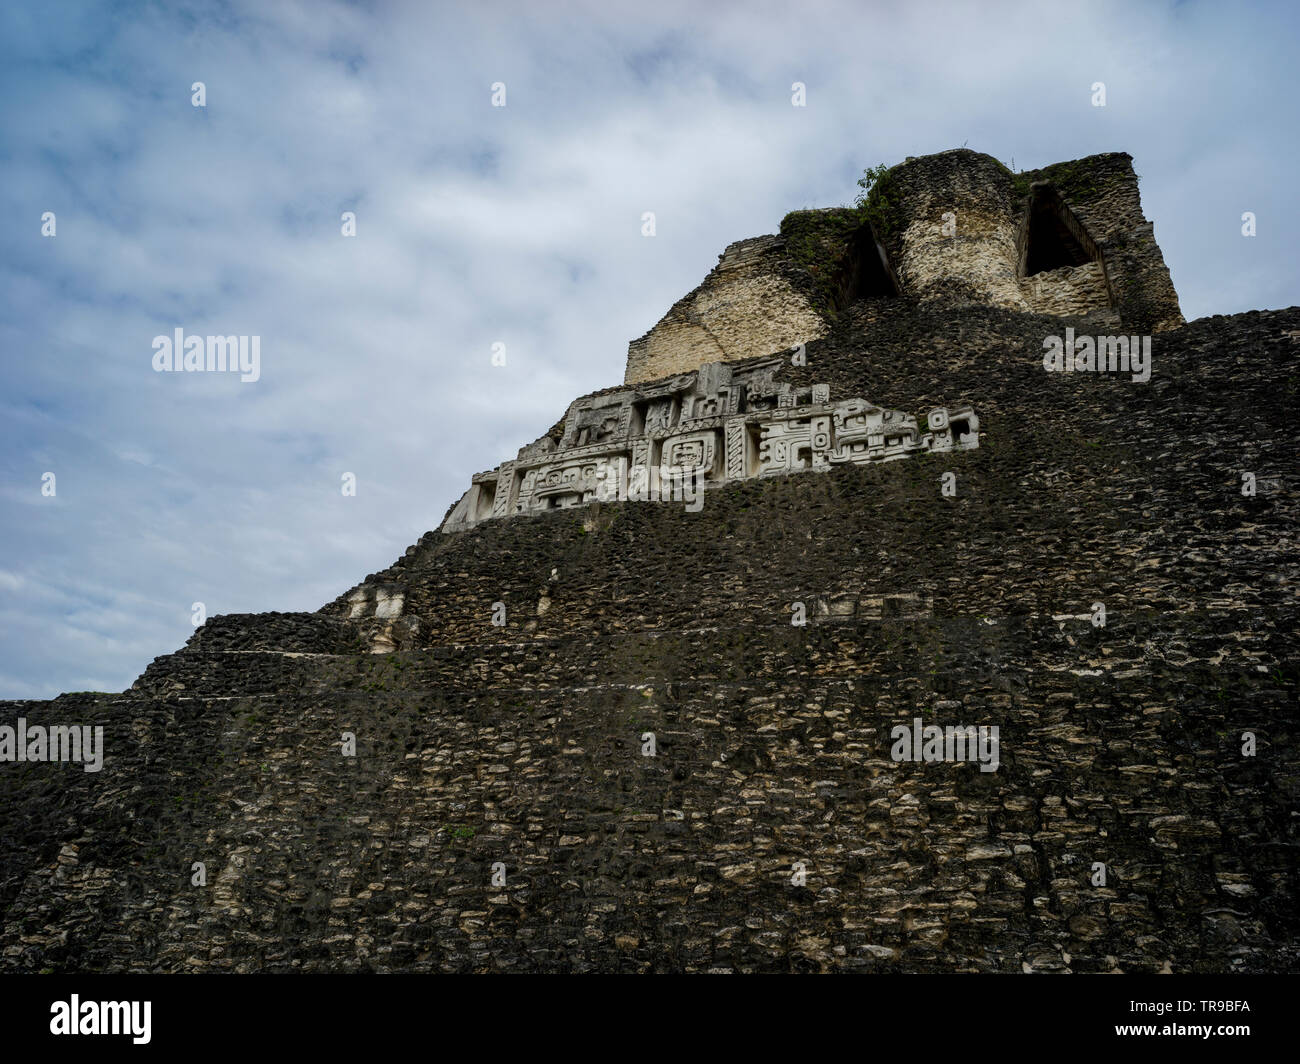 Low angle view of ruins of Mayan pyramid, Ancient Mayan Archaeological Site, San Jose Succotz, Cayo District, Belize Stock Photo